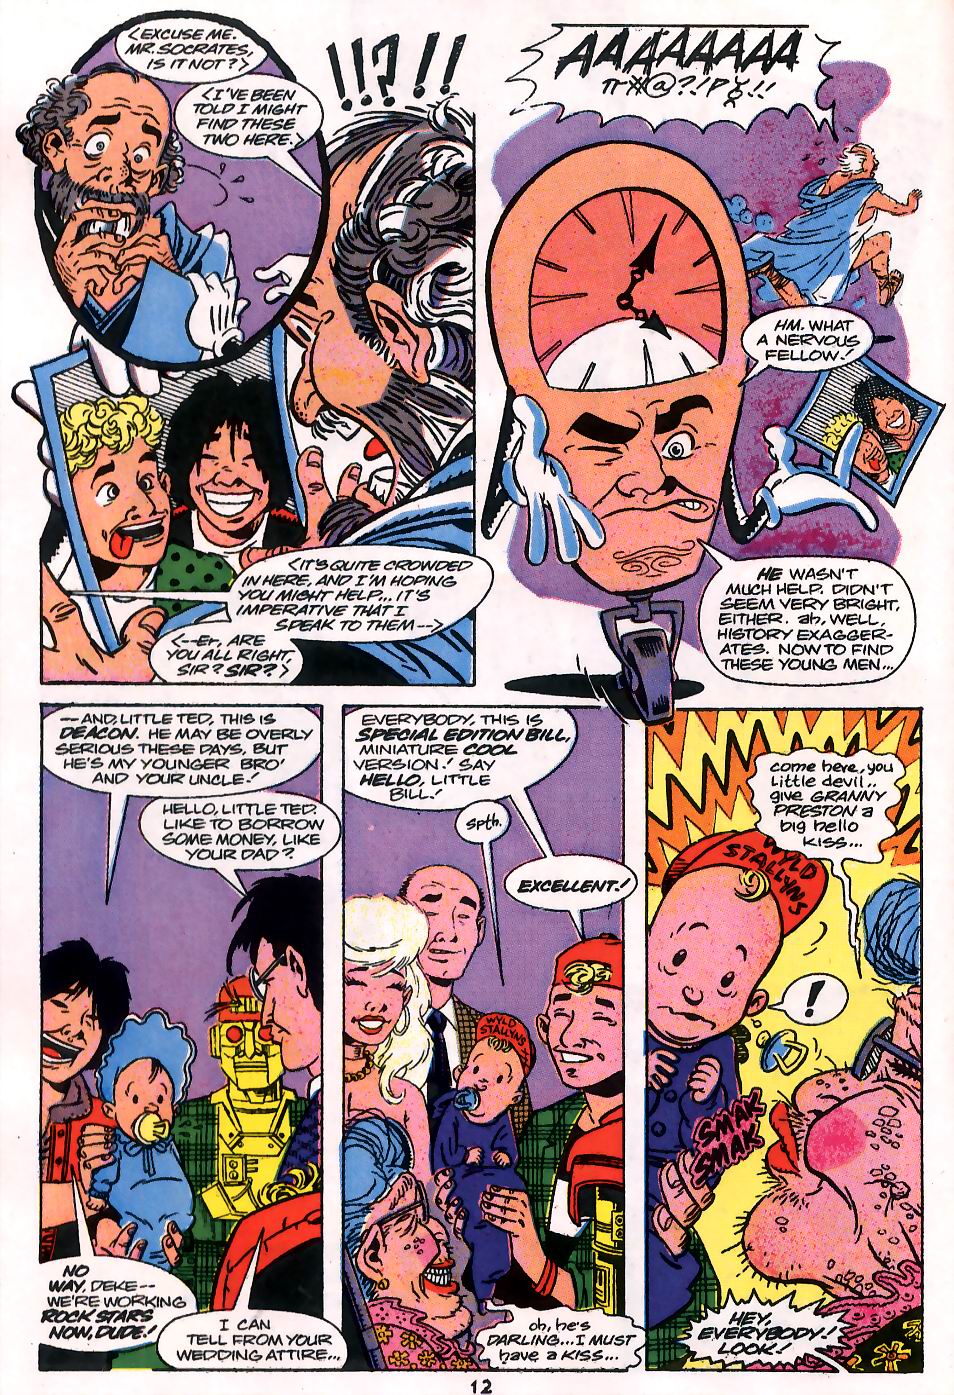 Read online Bill & Ted's Excellent Comic Book comic -  Issue #1 - 10